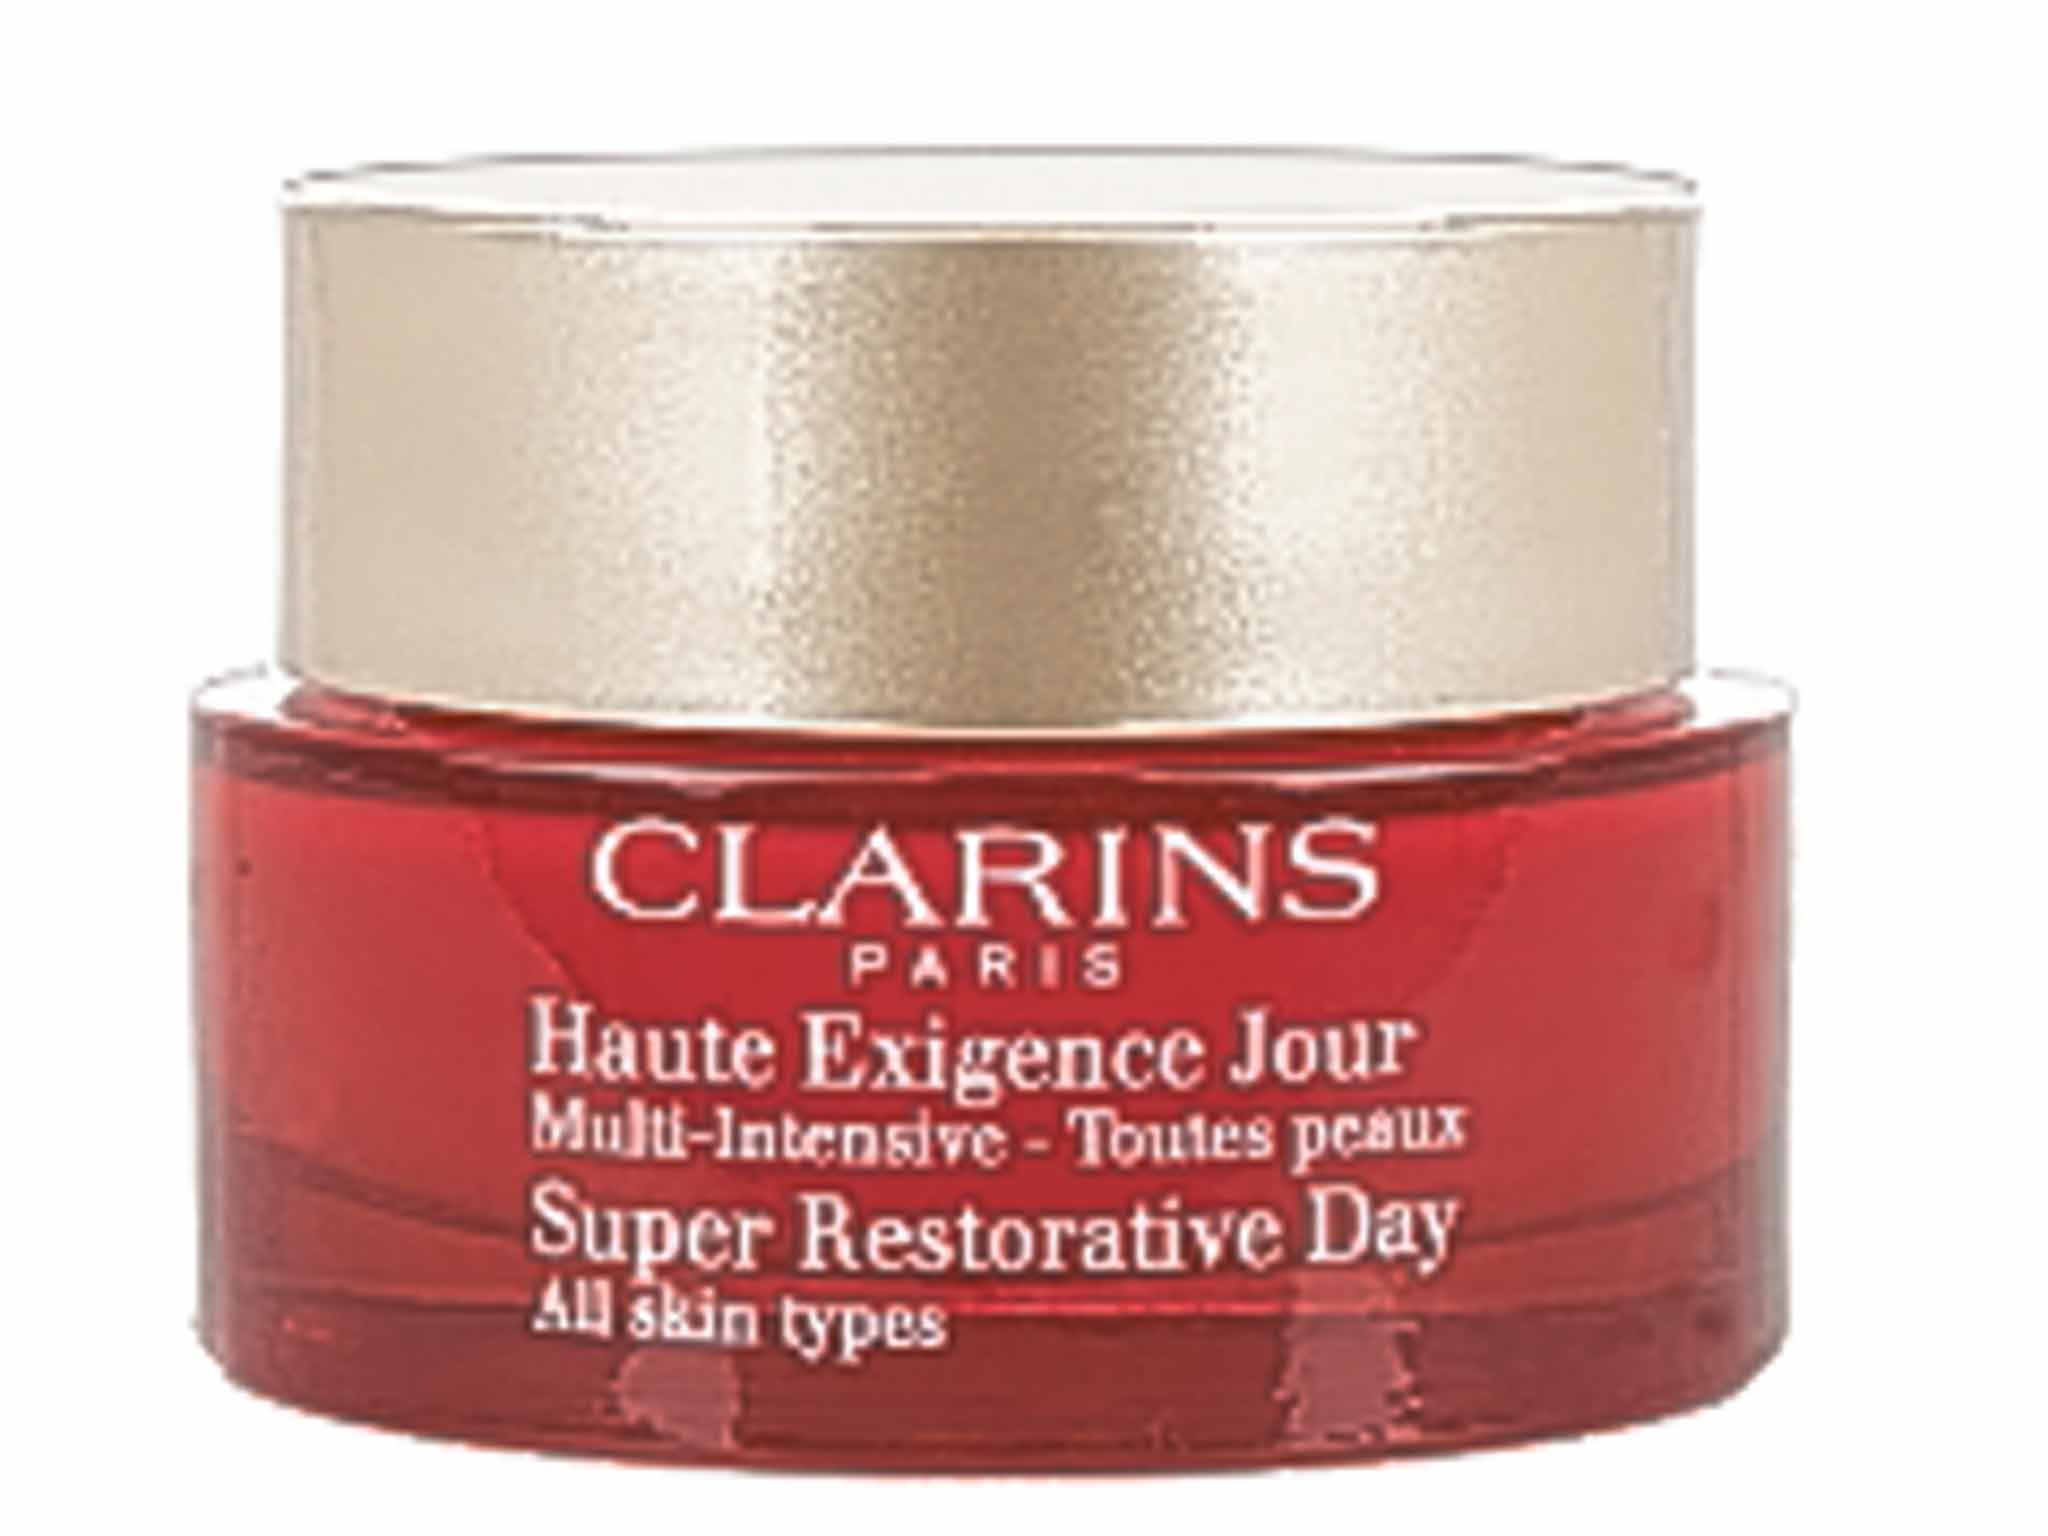 Super restorative day cream - £69, clarins.co.uk: This old-fashioned luscious cream provides a veritable feast for those who want to give their face and neck a generous dose of moisture.